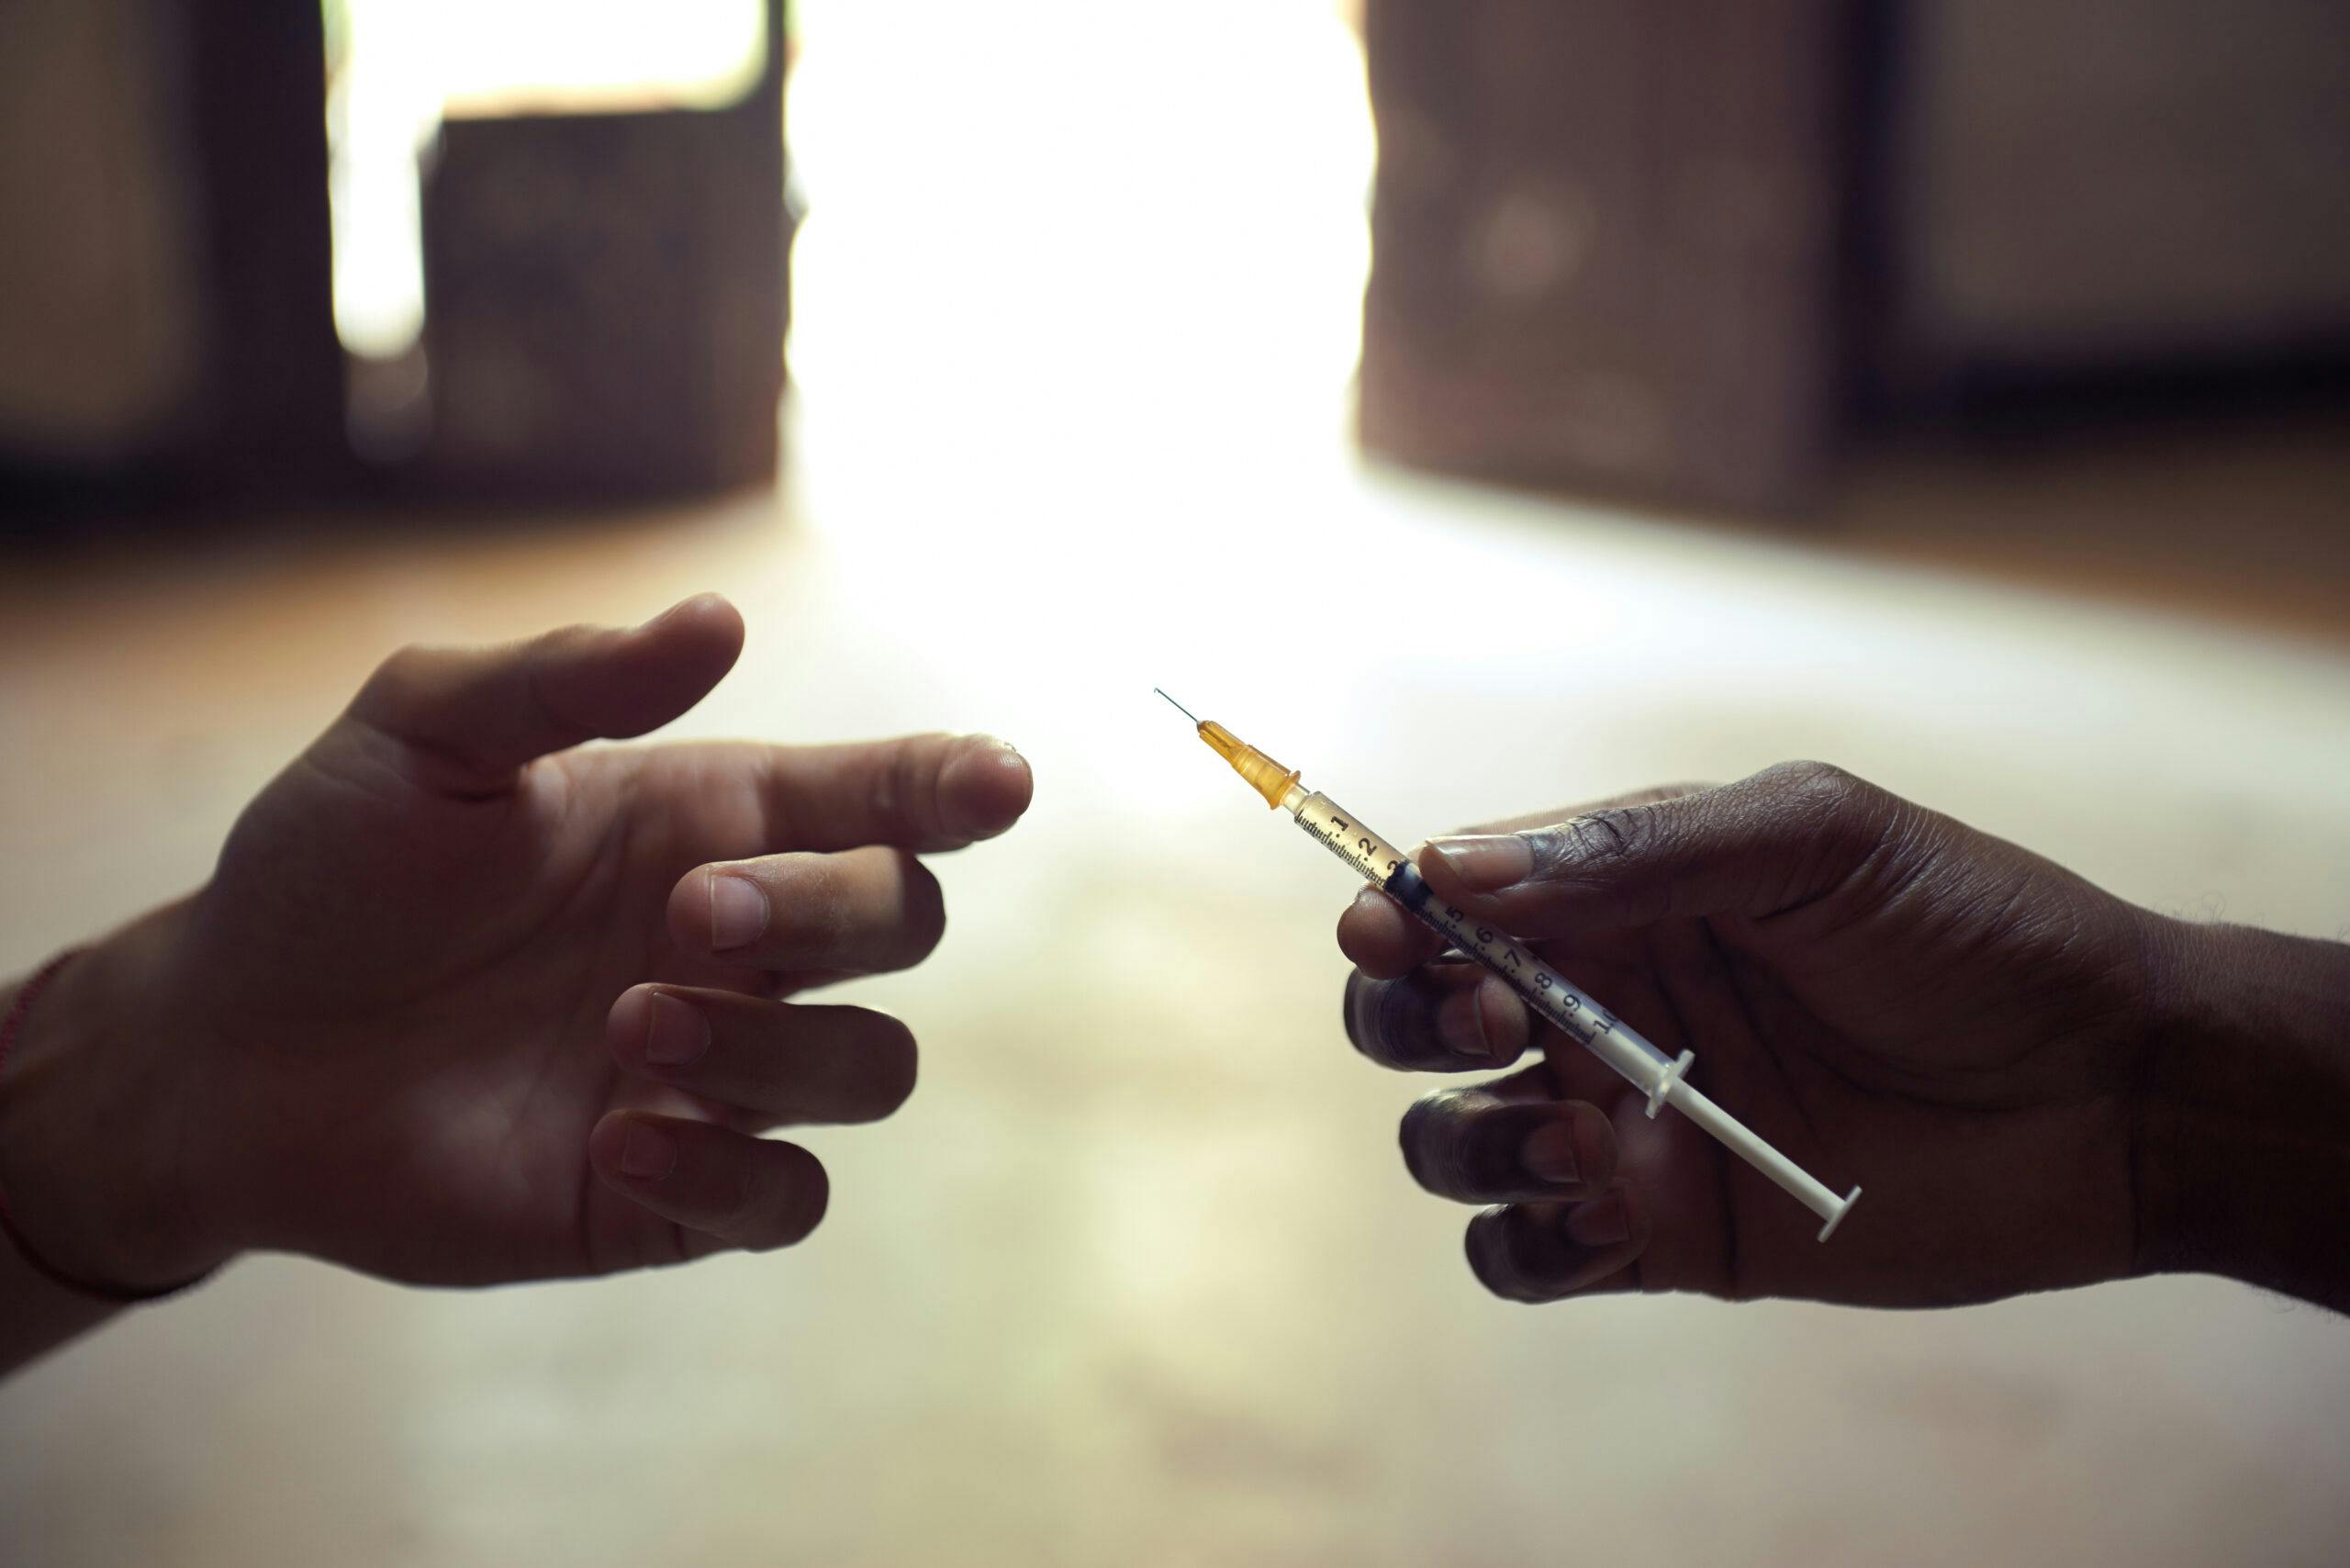 heroin addict with needle handing it to someone